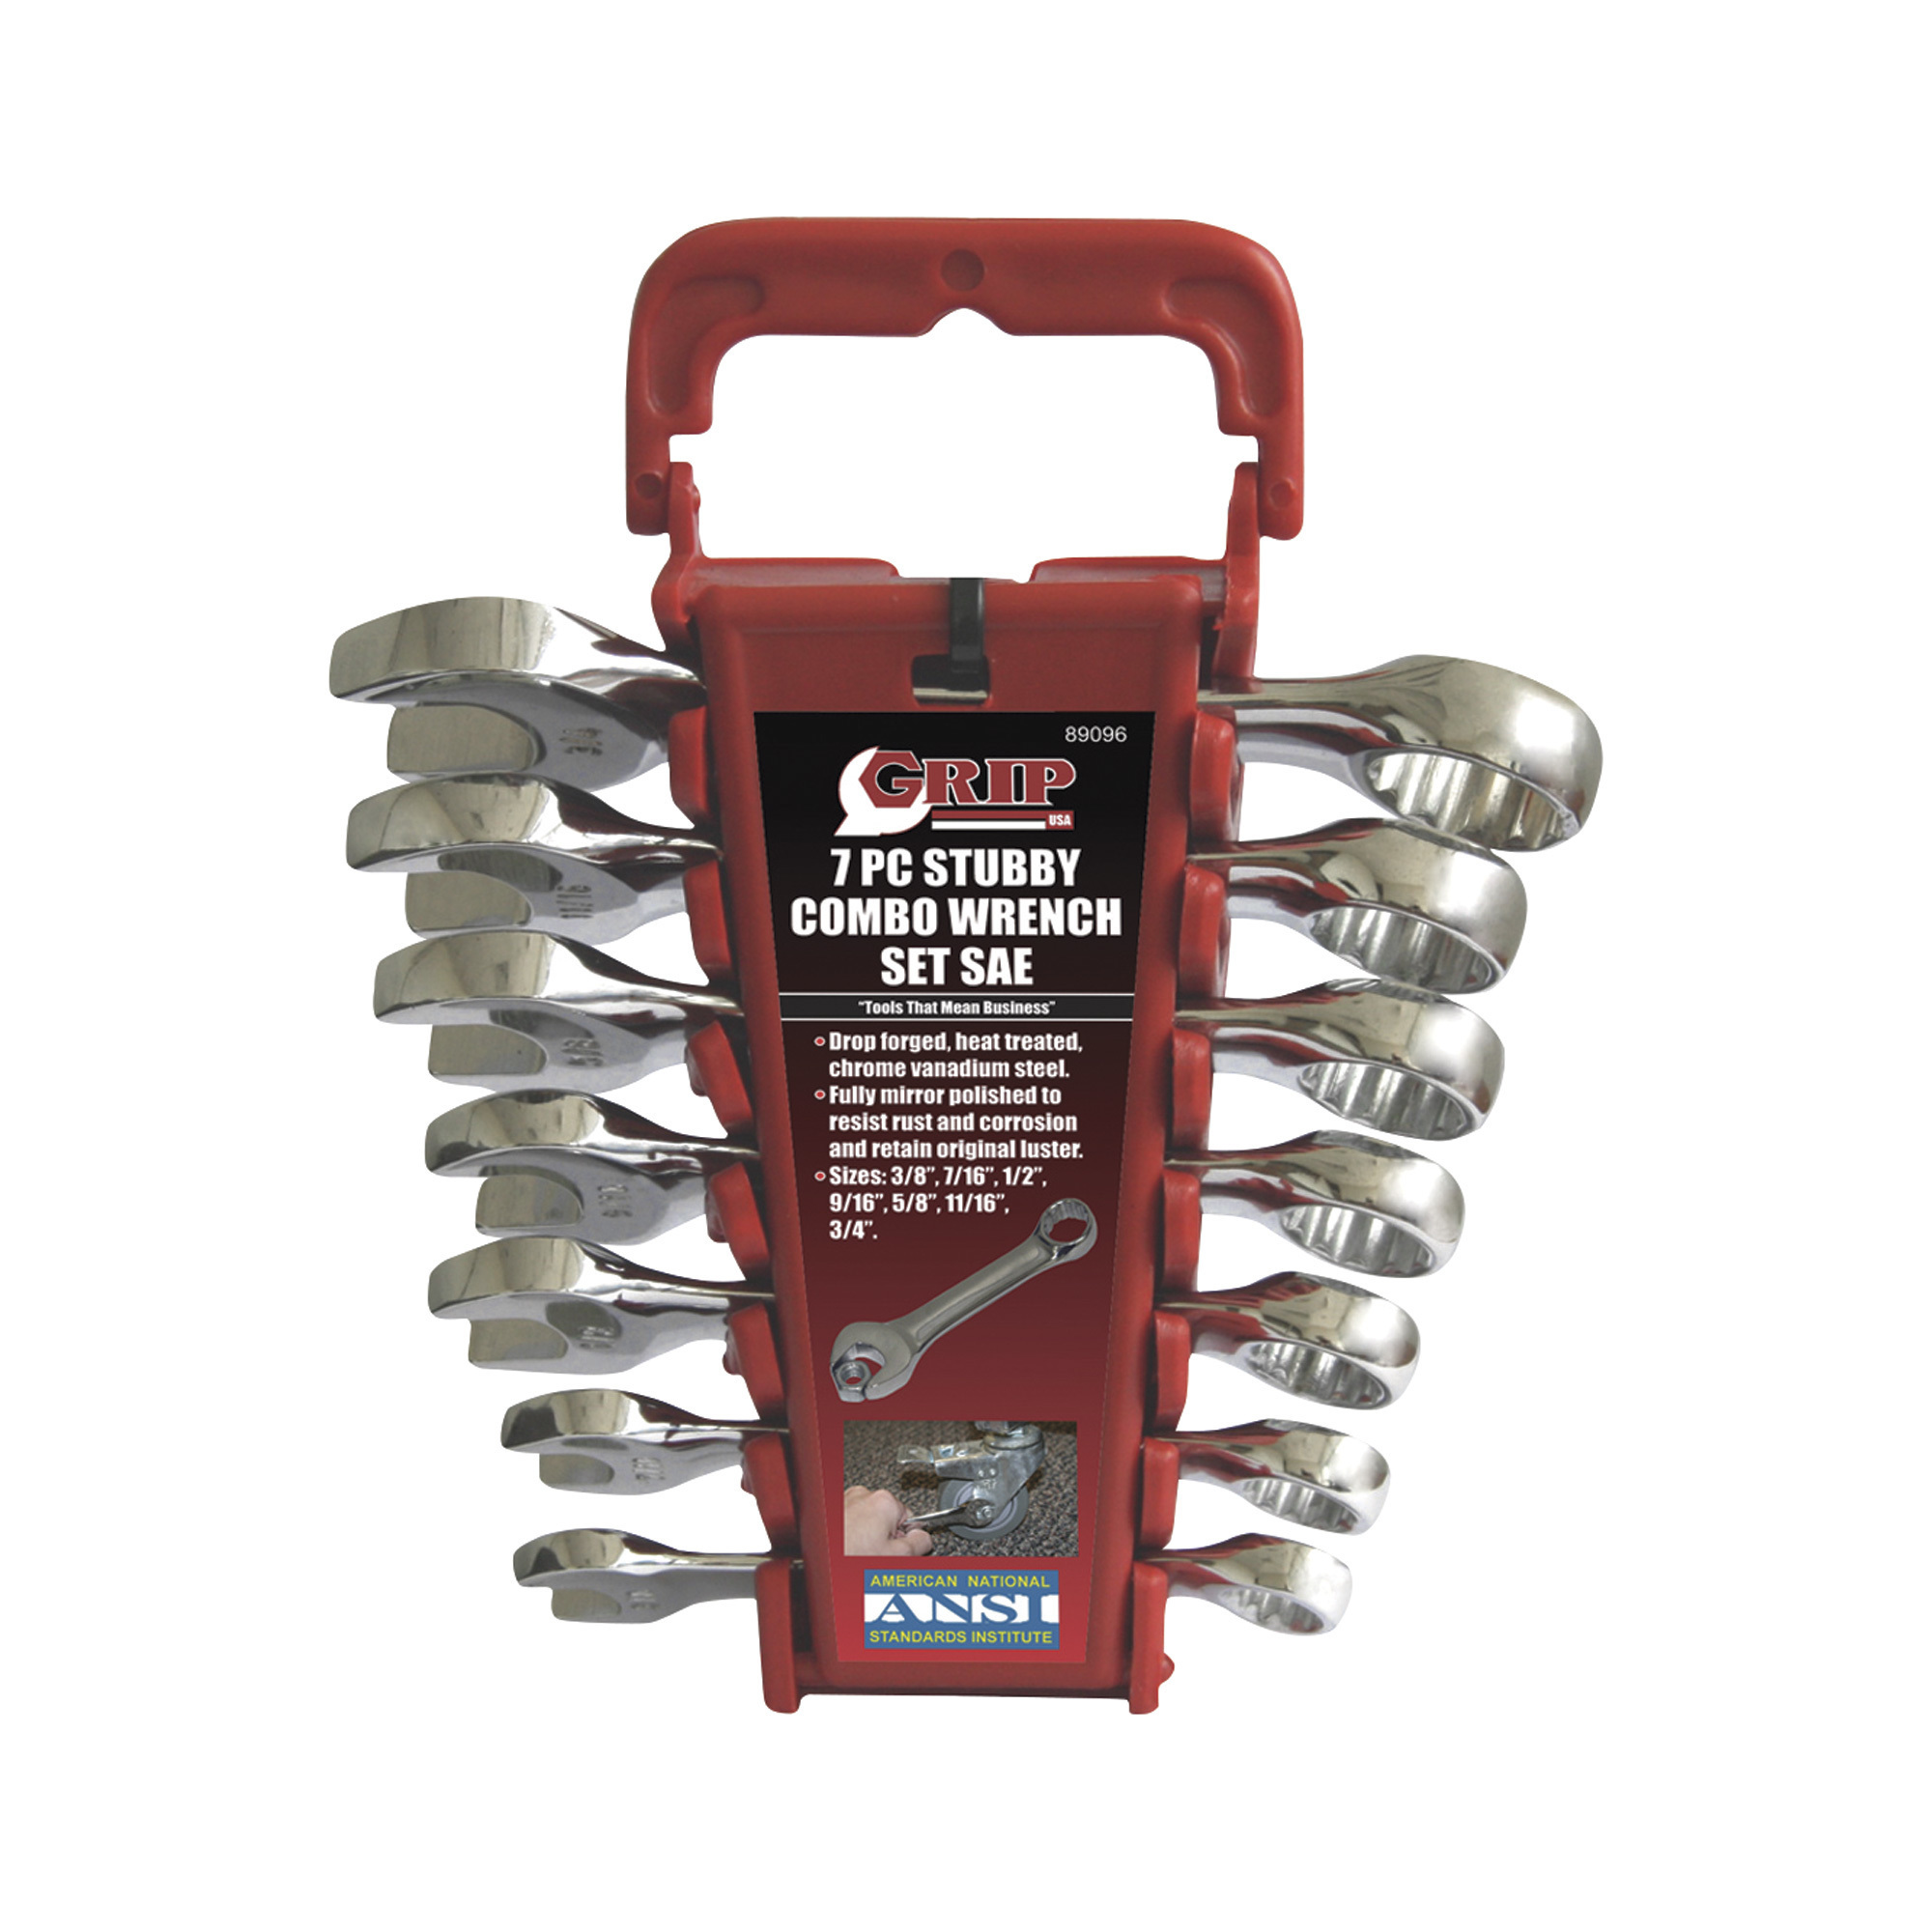 Grip-On Stubby Wrench Set, 7-Piece, SAE, Model 89096